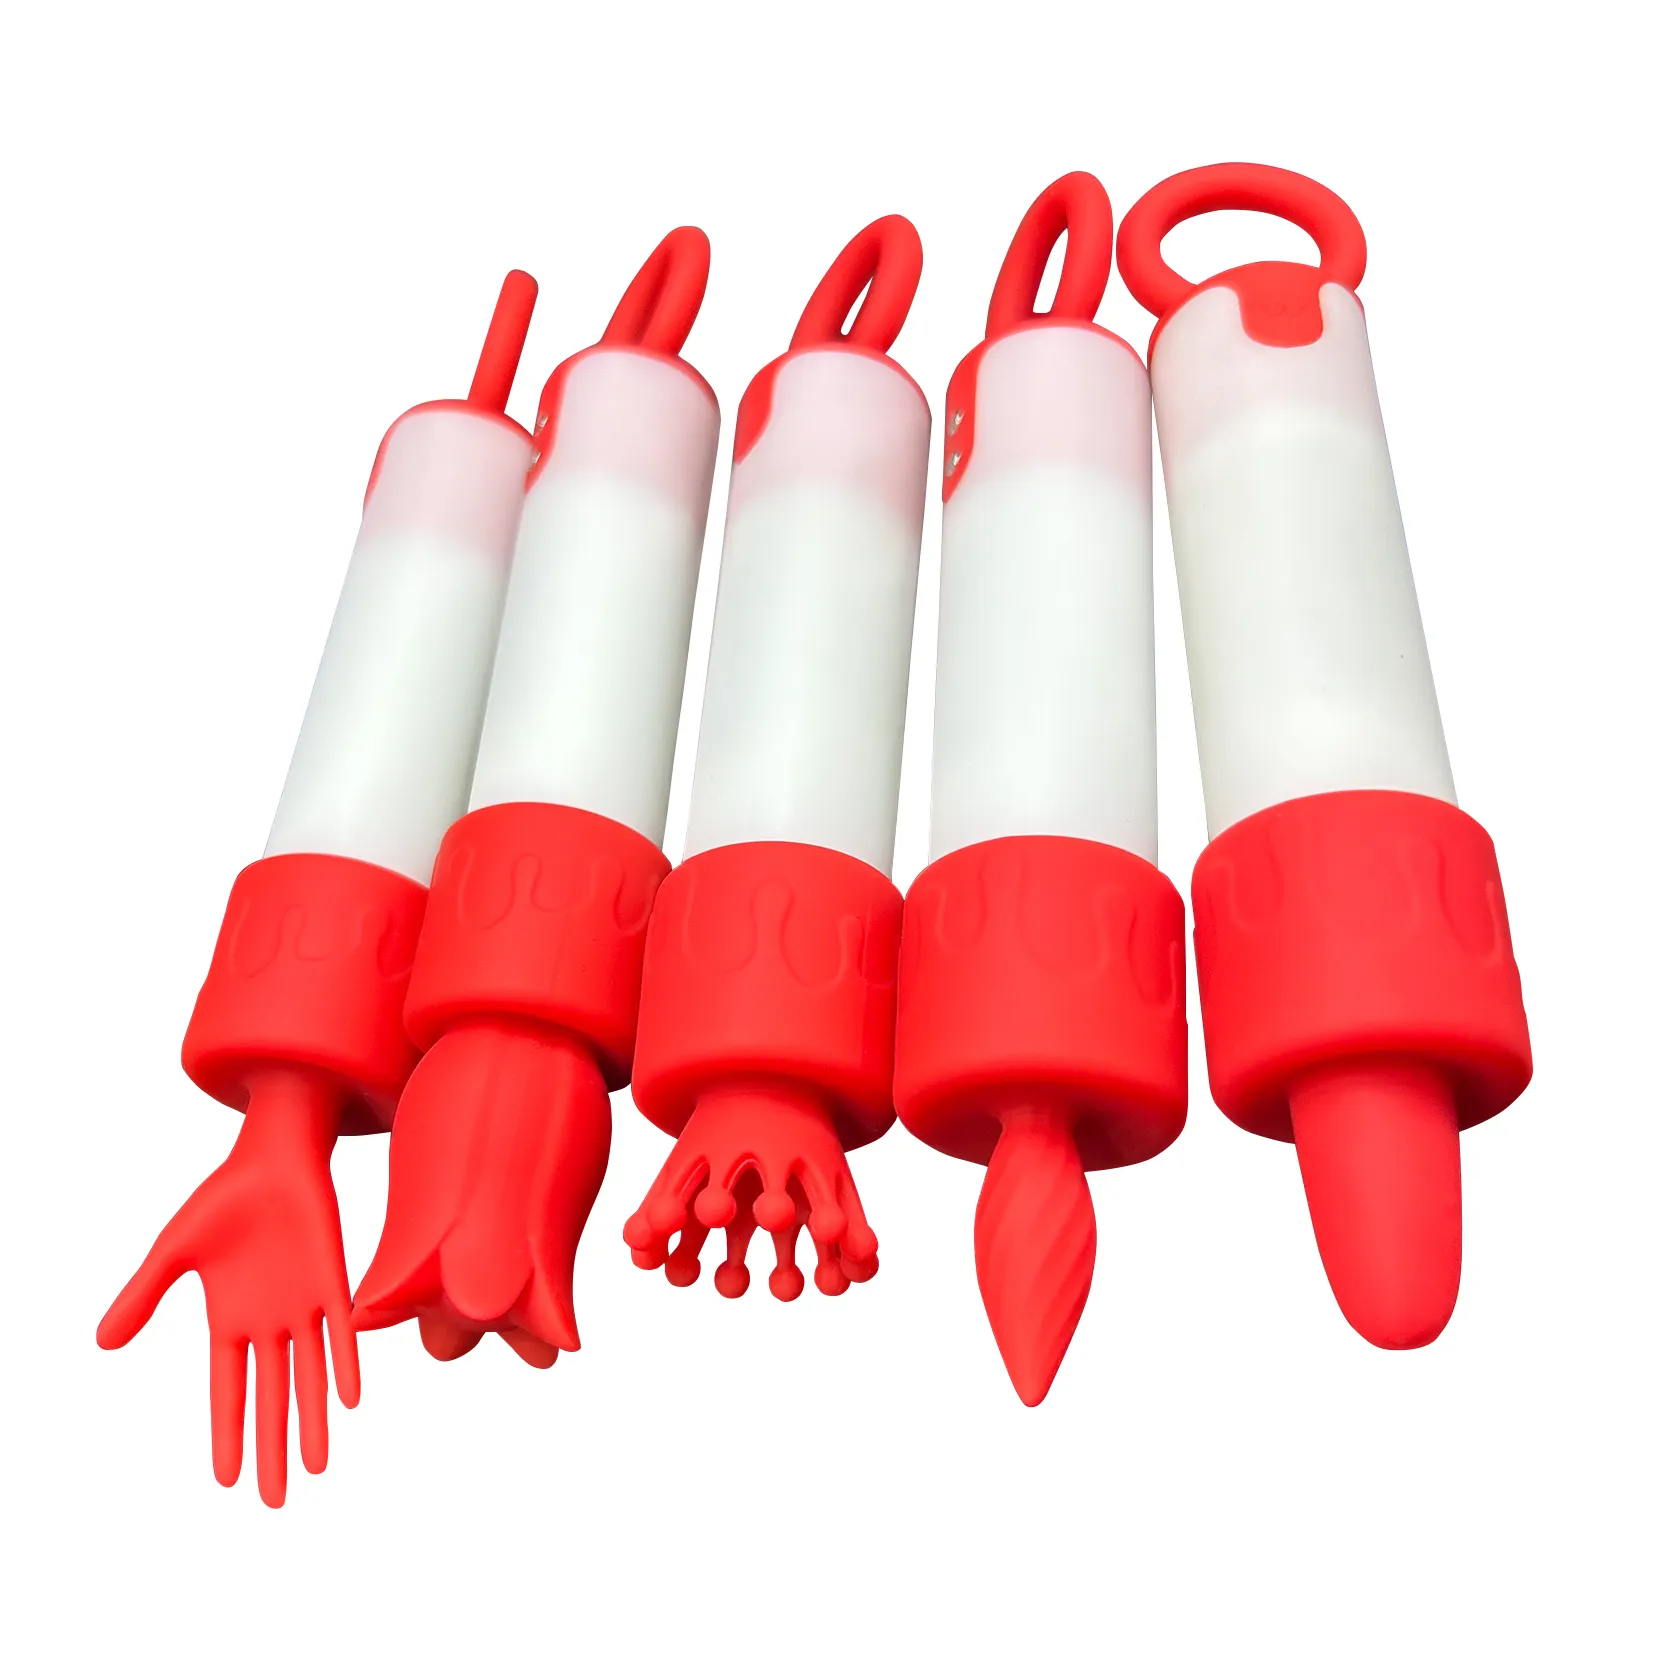 Magnetic Charging bullet Vibrator with 5 silicone heads